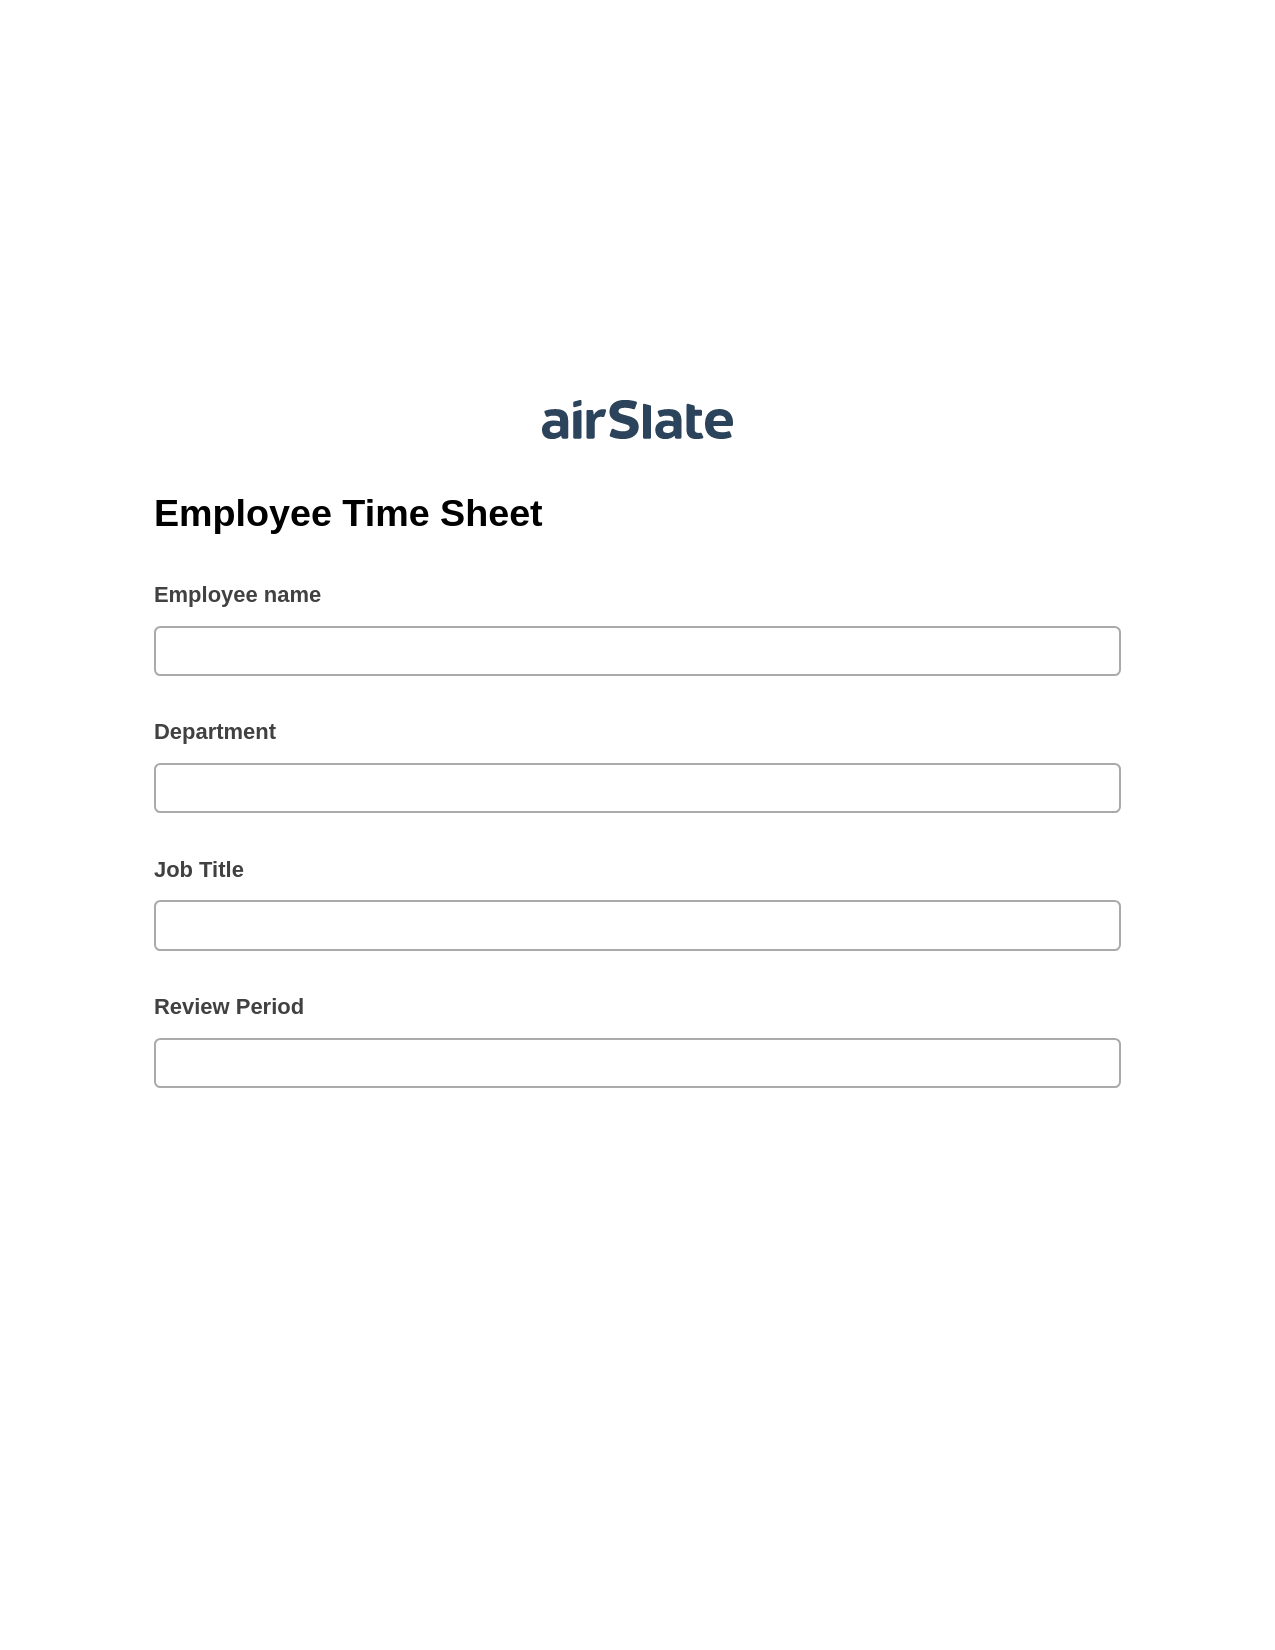 Multirole Employee Time Sheet Pre-fill Dropdowns from Airtable, Rename Slate Bot, Archive to OneDrive Bot